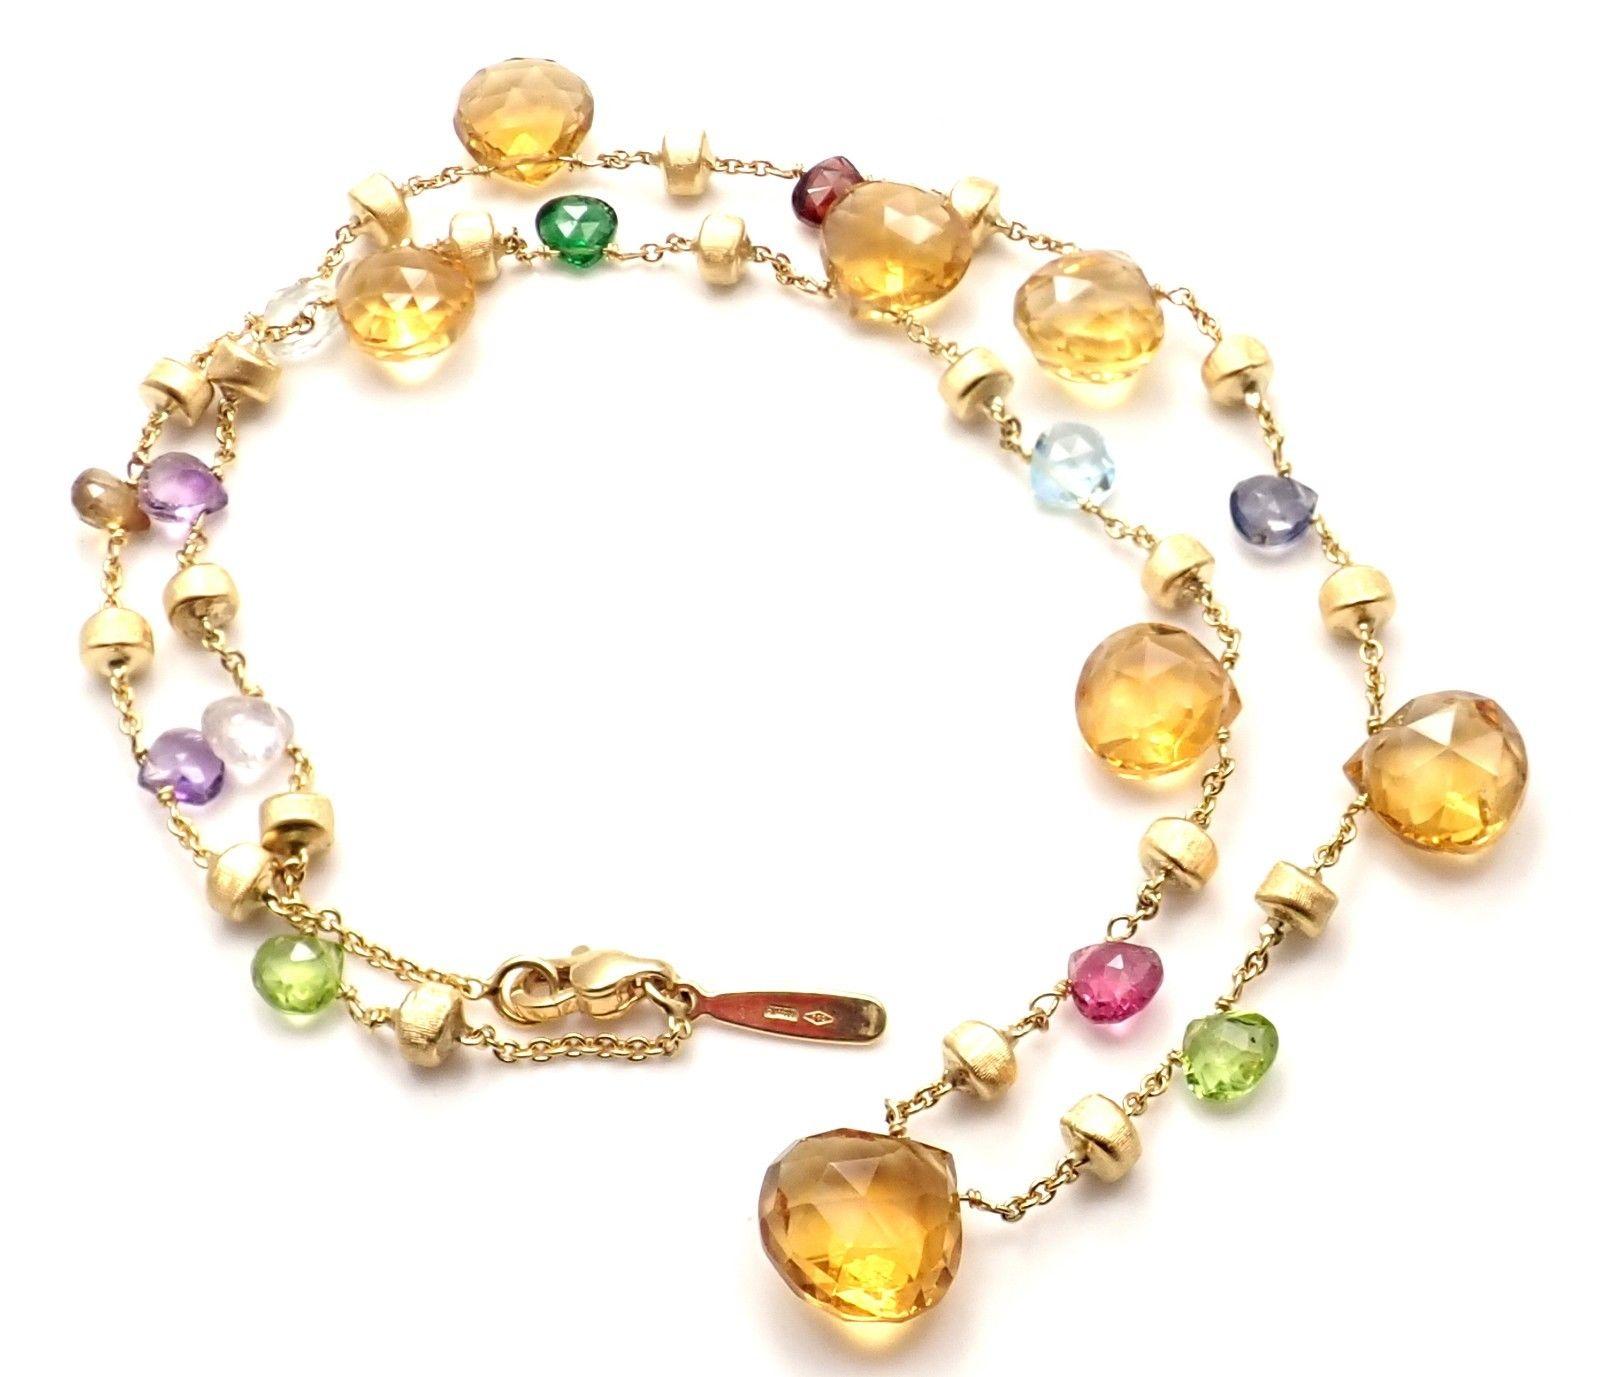 Marco Bicego Paradise Multi-Colored Gemstone Yellow Gold Necklace 1